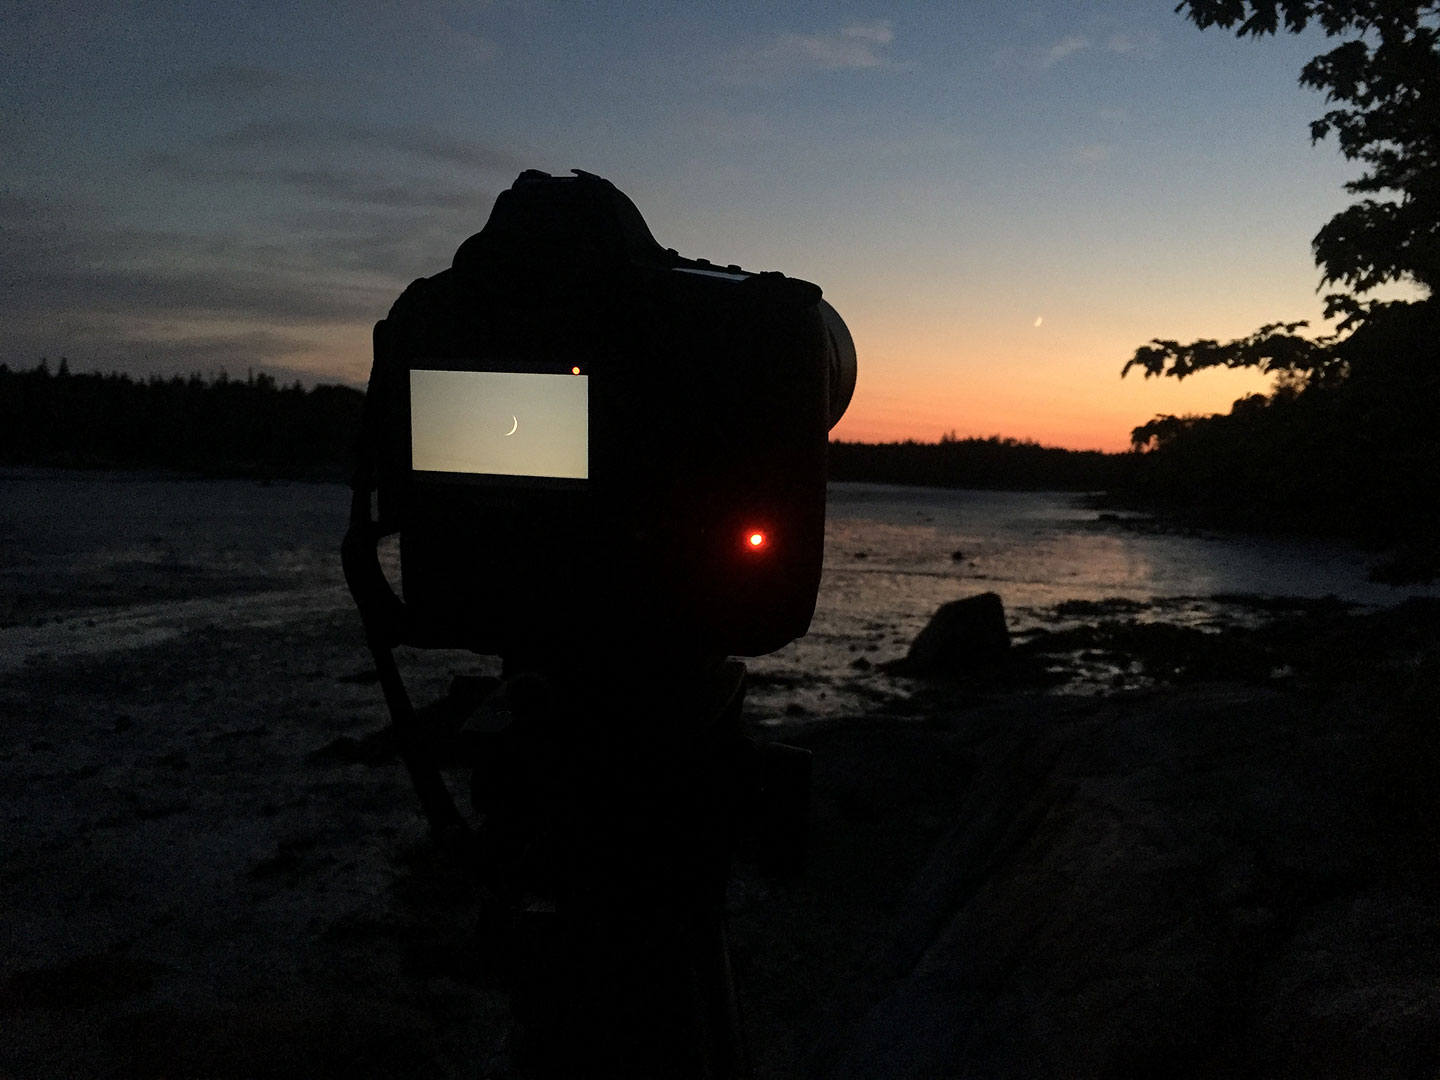 Filming the crescent moon in Fish Creek Cove. Canon 1DX Mark II with the Canon 100-400 F/4.5-5.6 L IS II Lens. September, 2016.